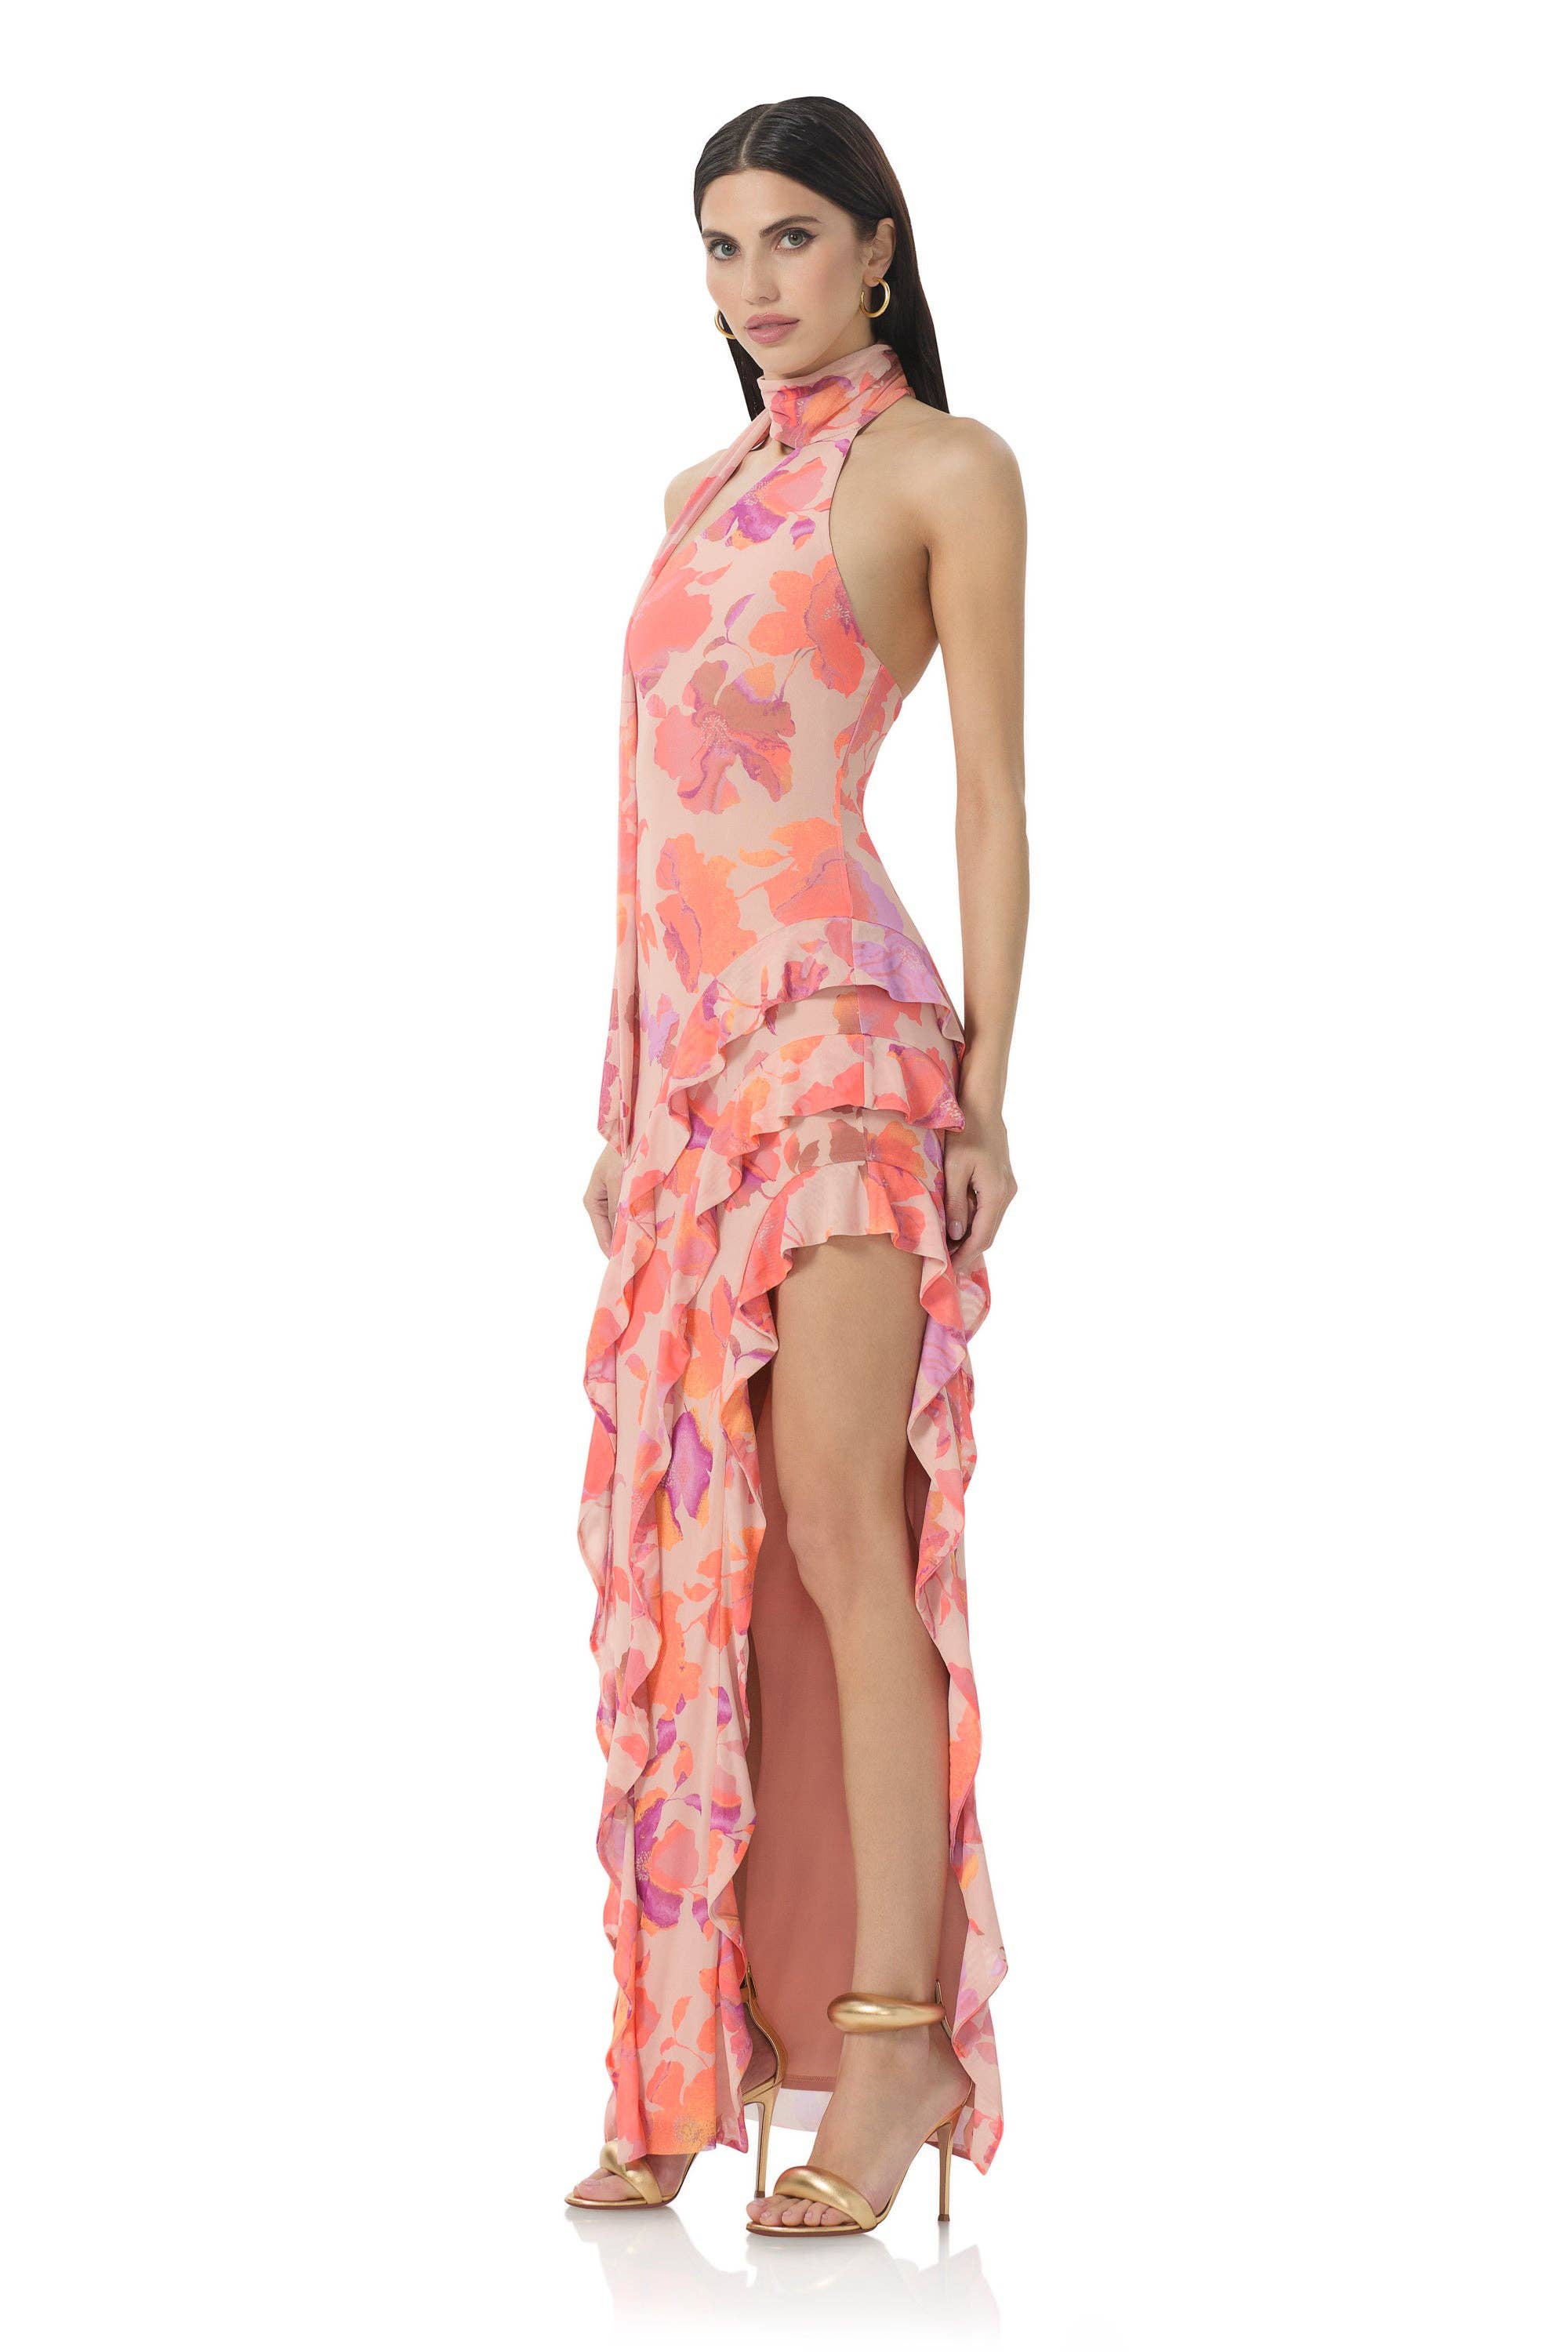 AFRM - Desiree Ruffle Maxi Dress - Nude Marble Floral